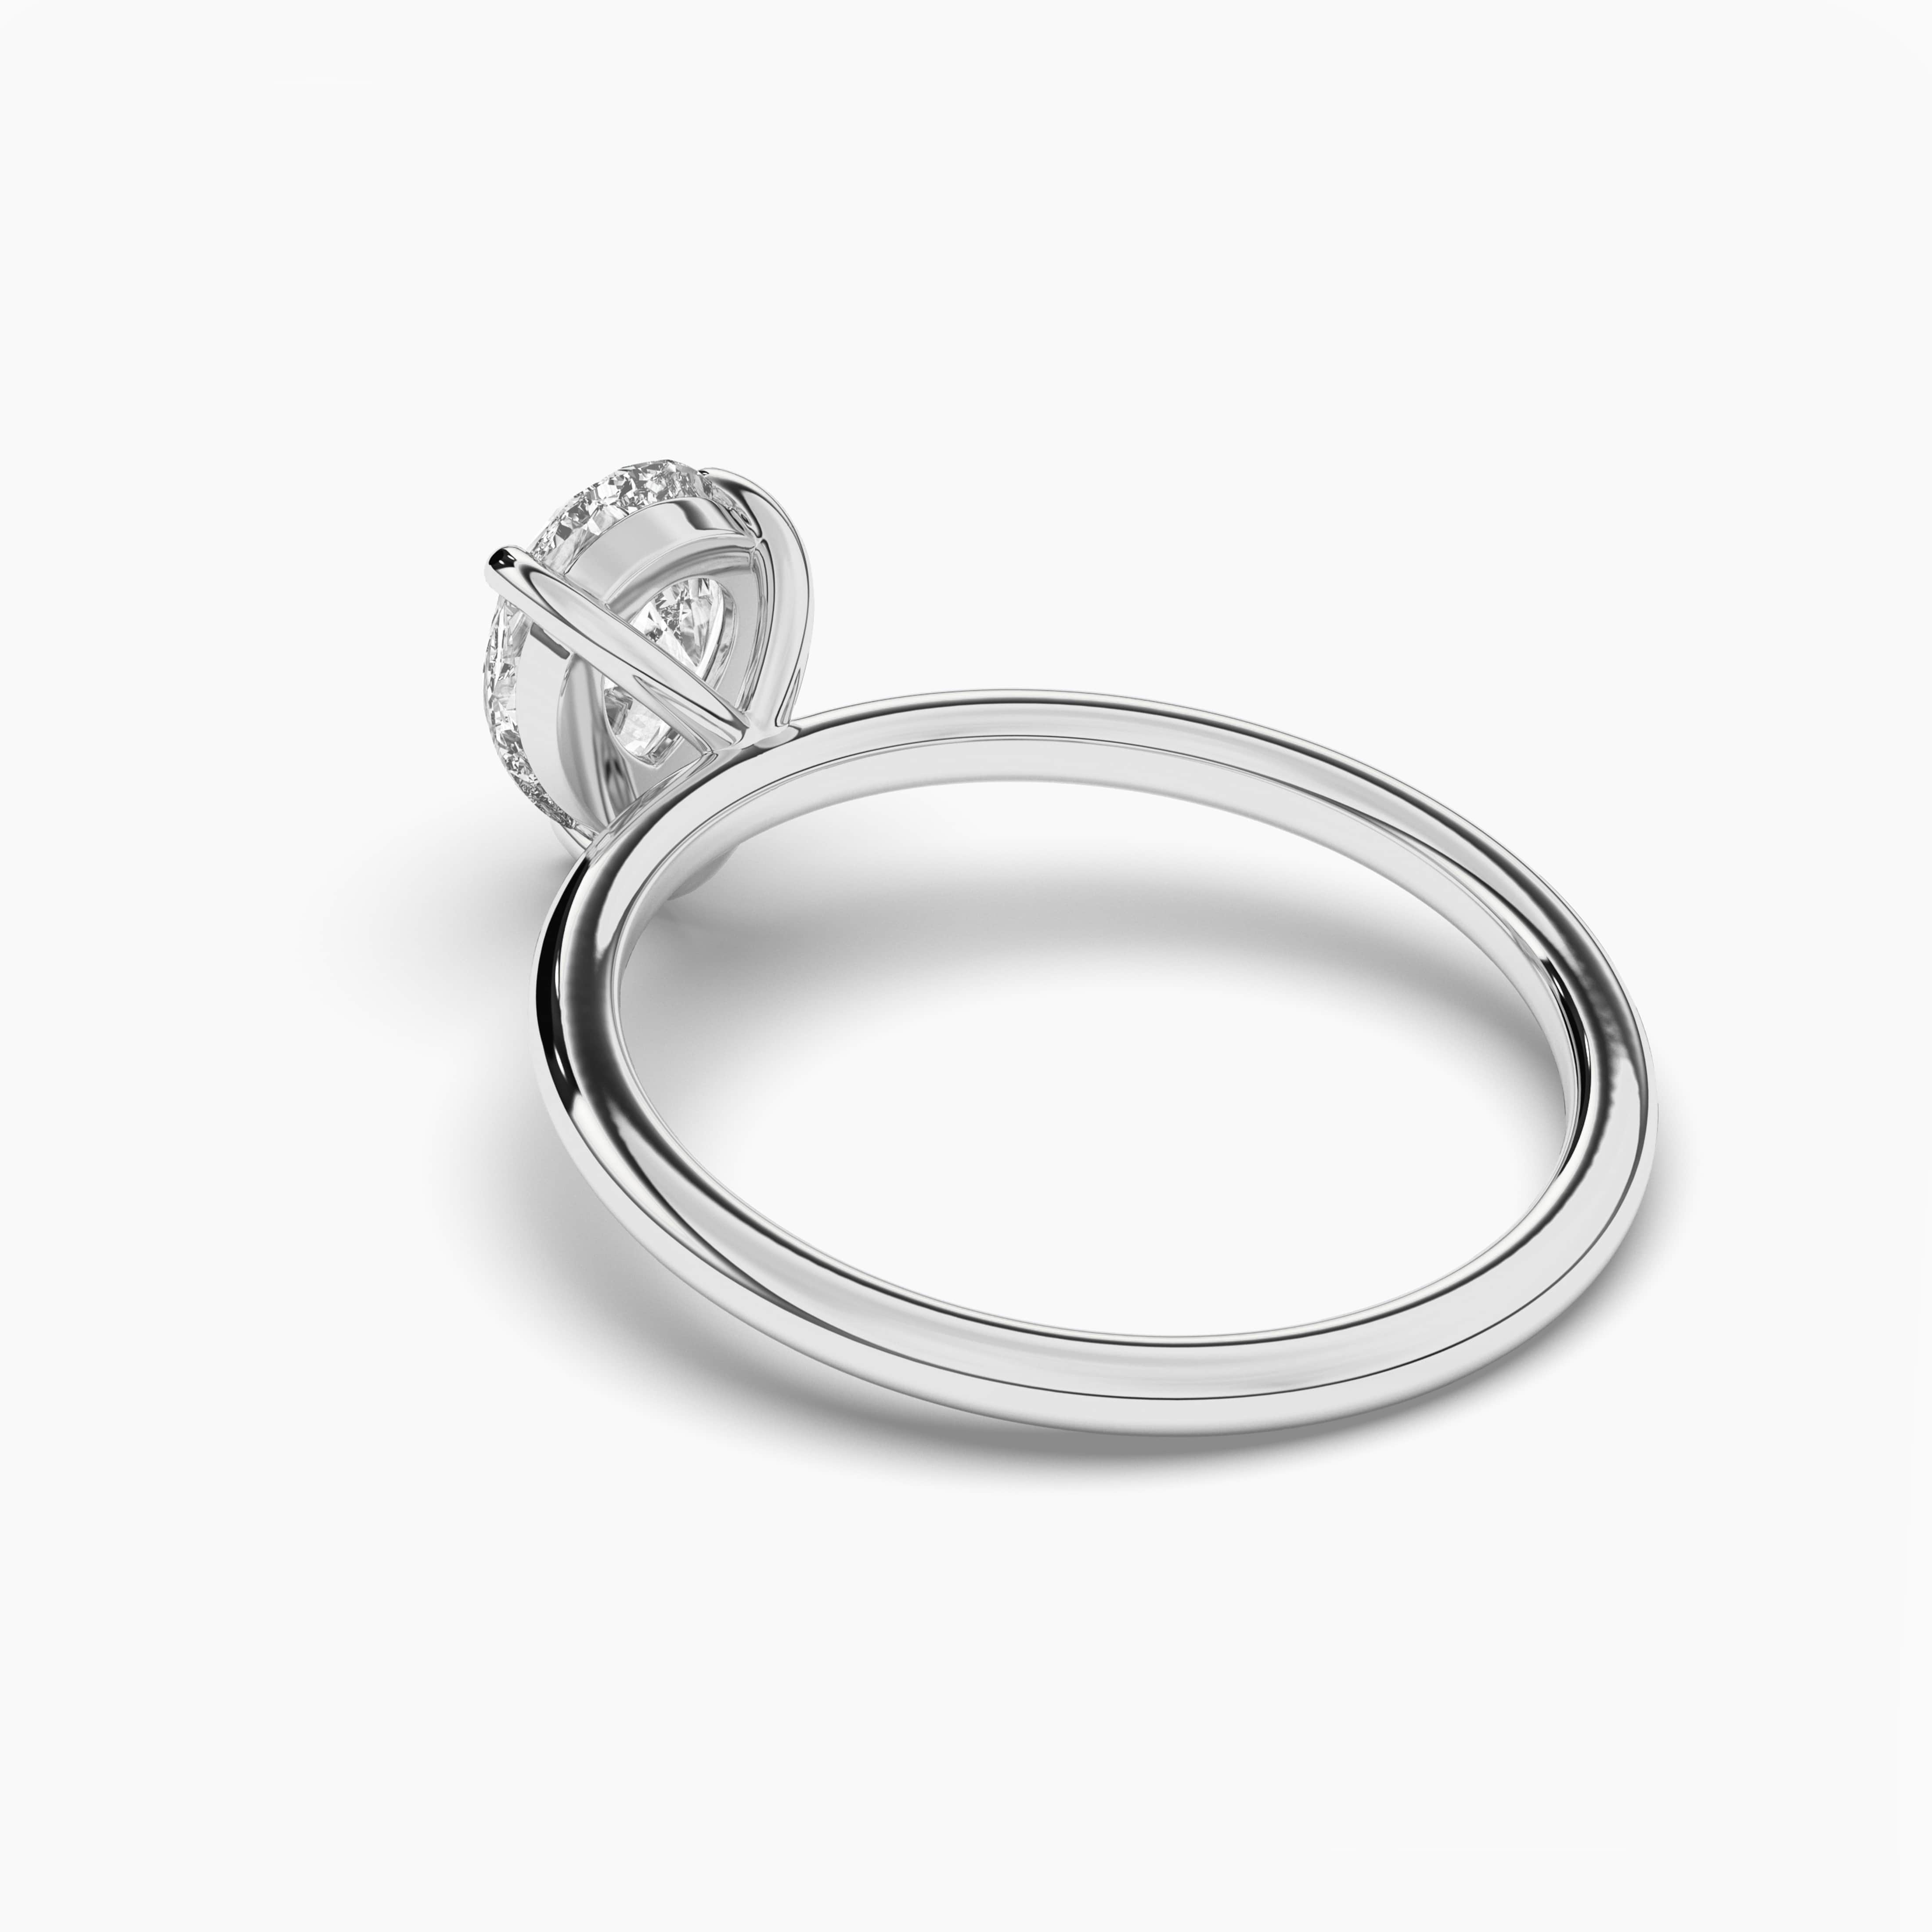 diamond solitaire ring in white gold